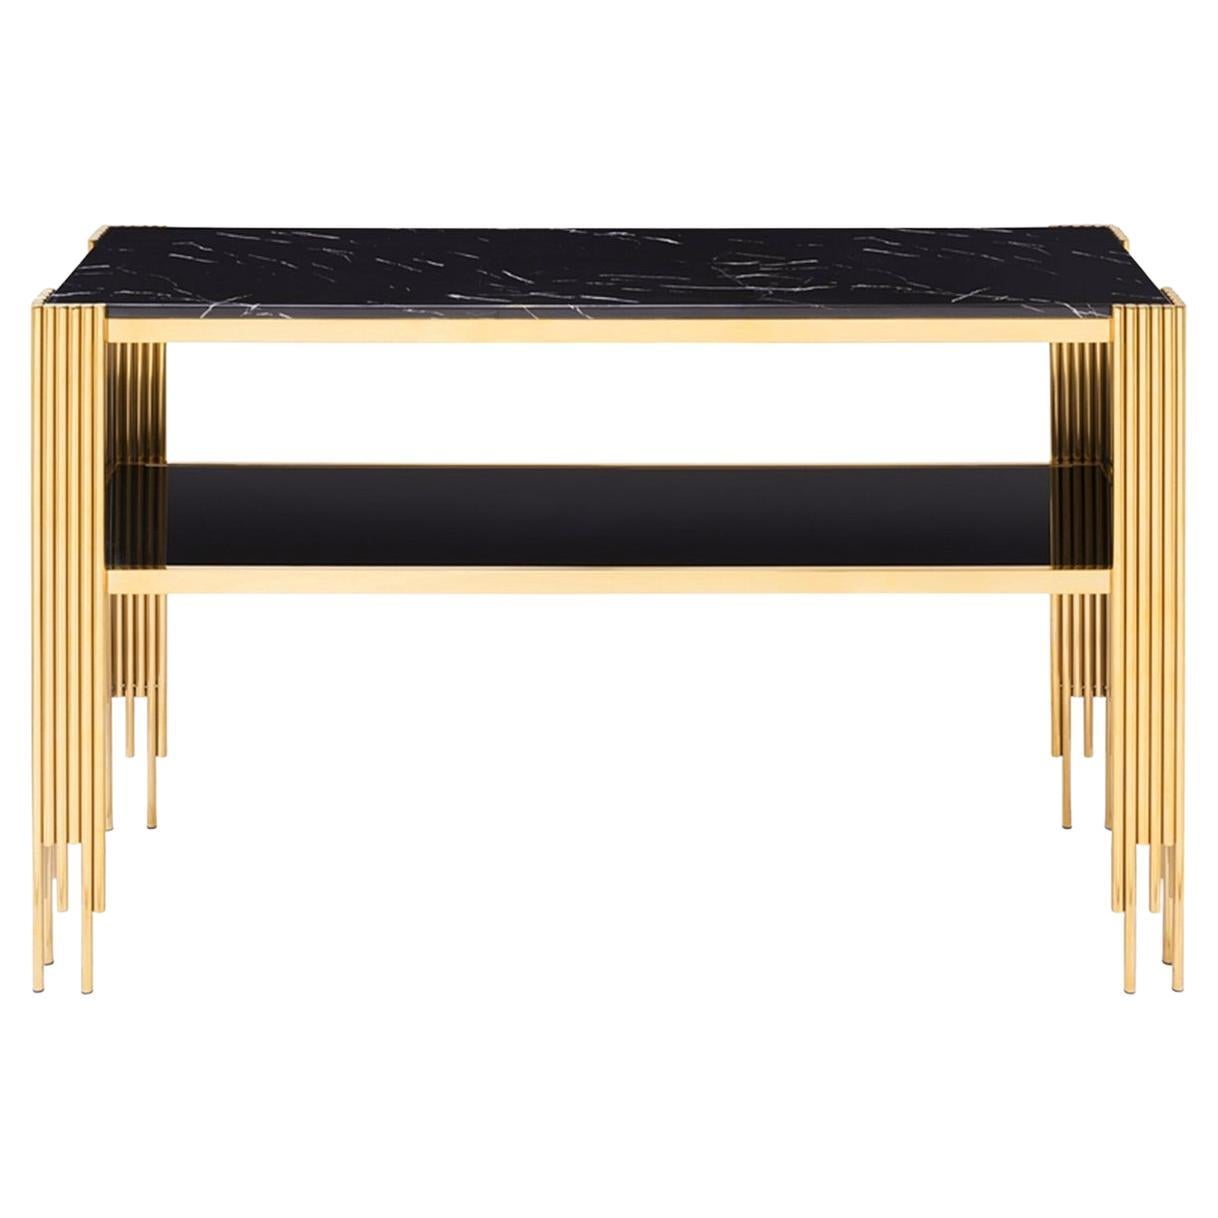 Ororods Console Table For Sale